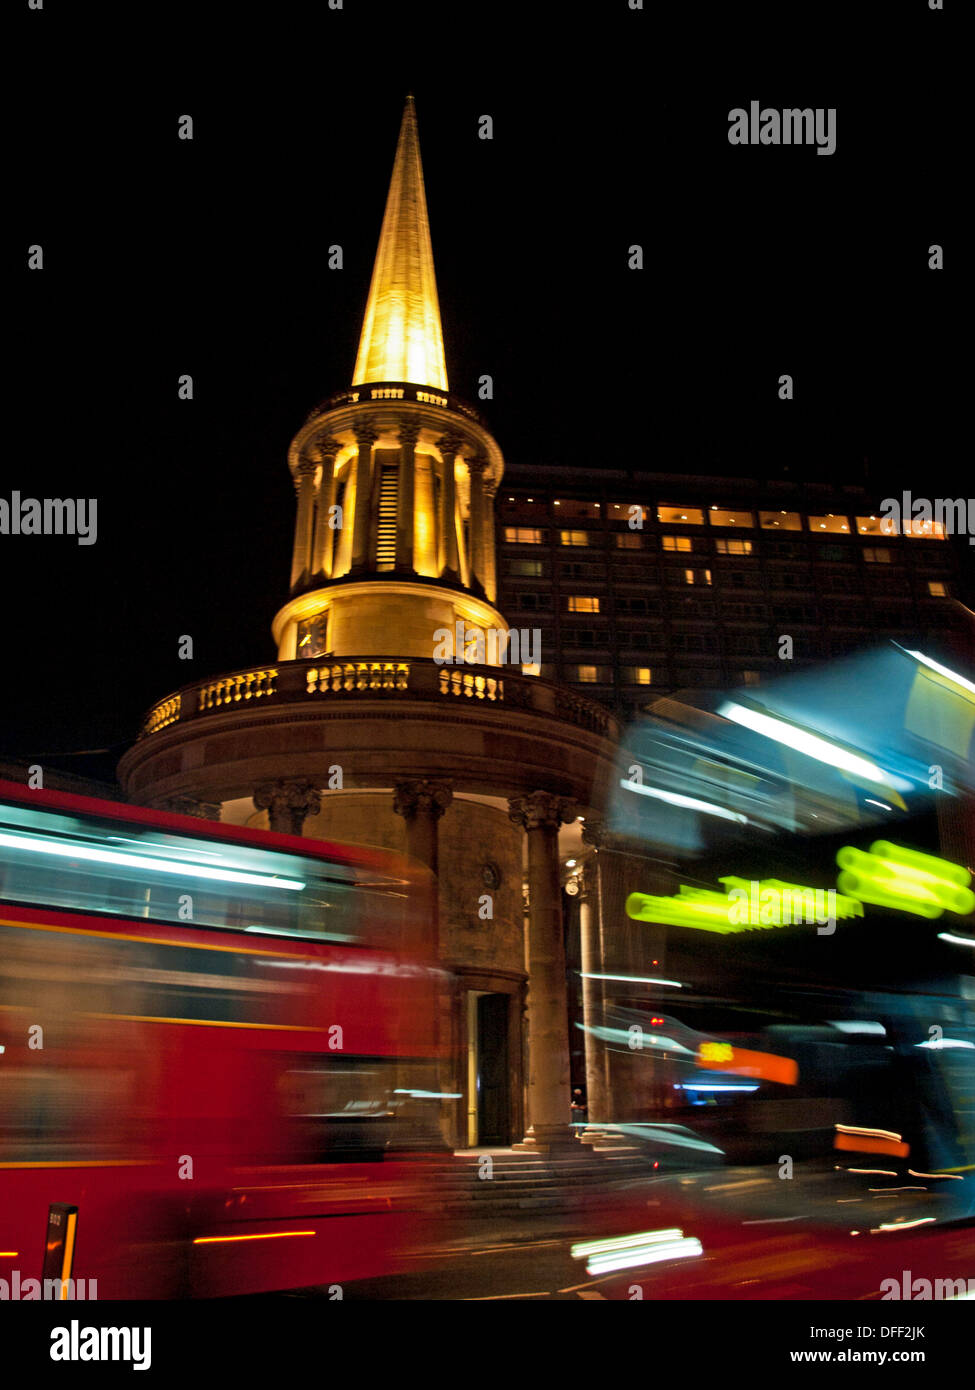 Double-decker buses in transit showing All Souls Church at night, Langham Place, London, England, United Kingdom Stock Photo